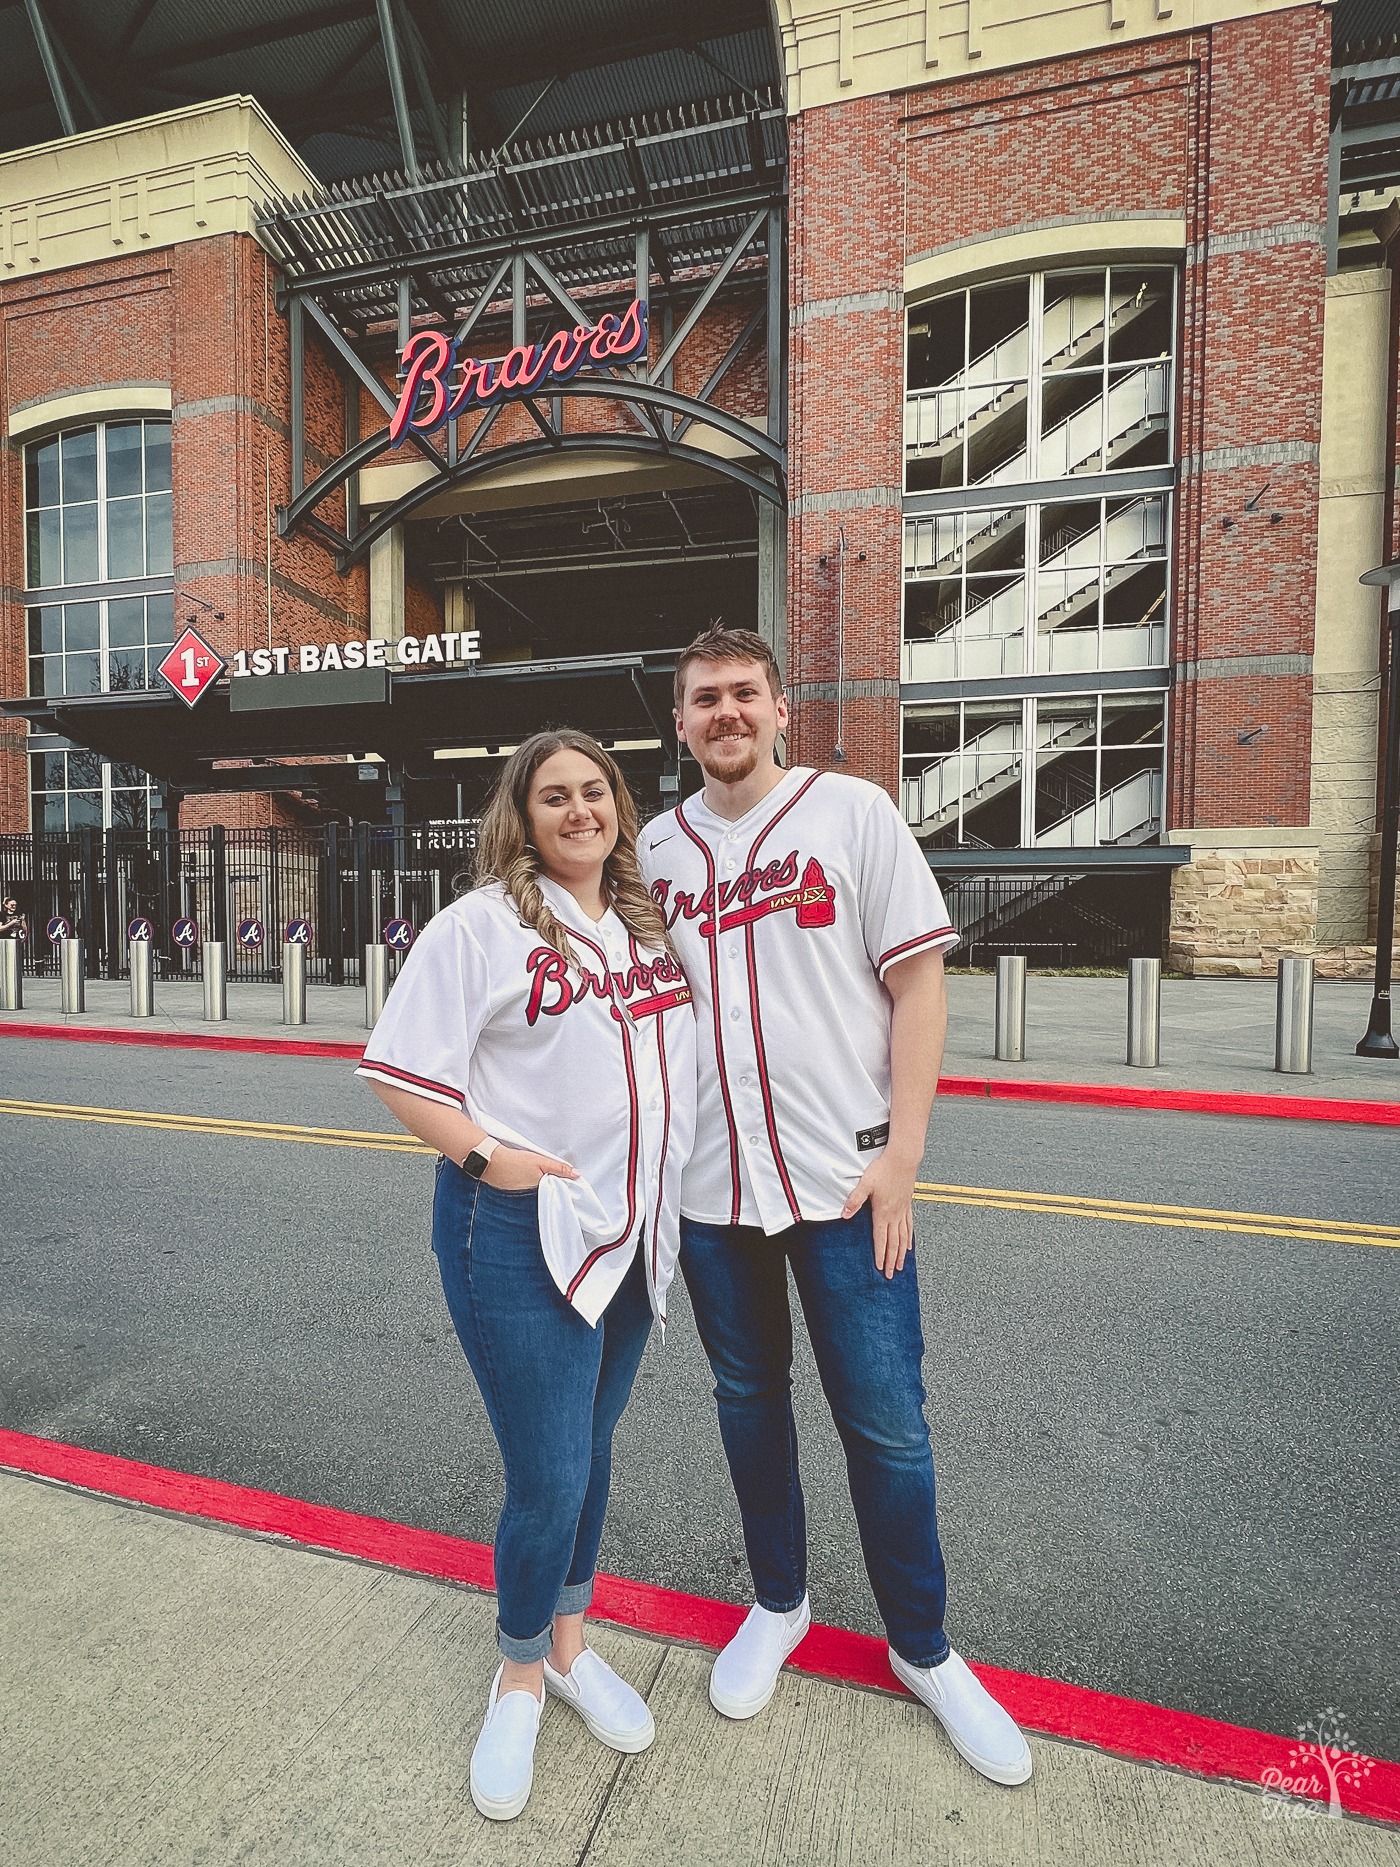 Smiling couple standing in front of the Atlanta Braves 1st base gate wearing sports jerseys